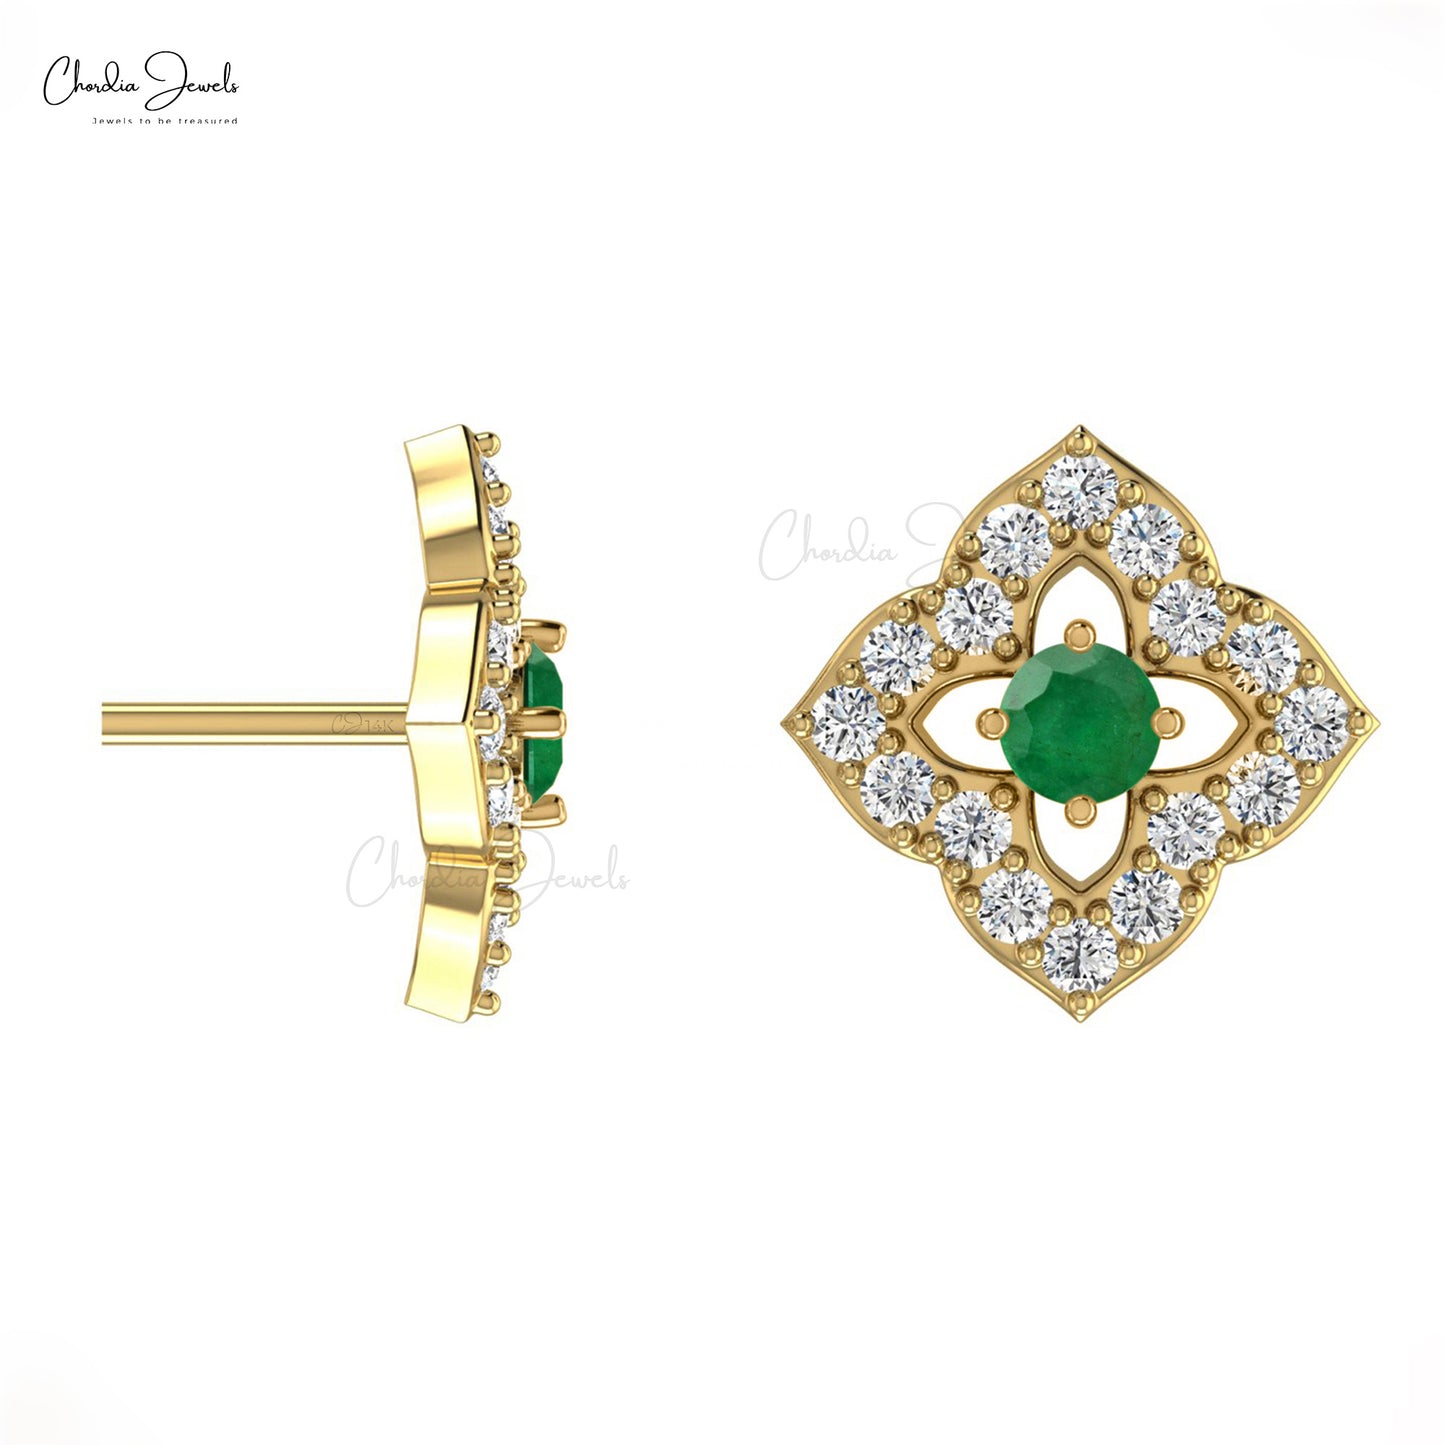 Make a statement with these emerald floral earrings.